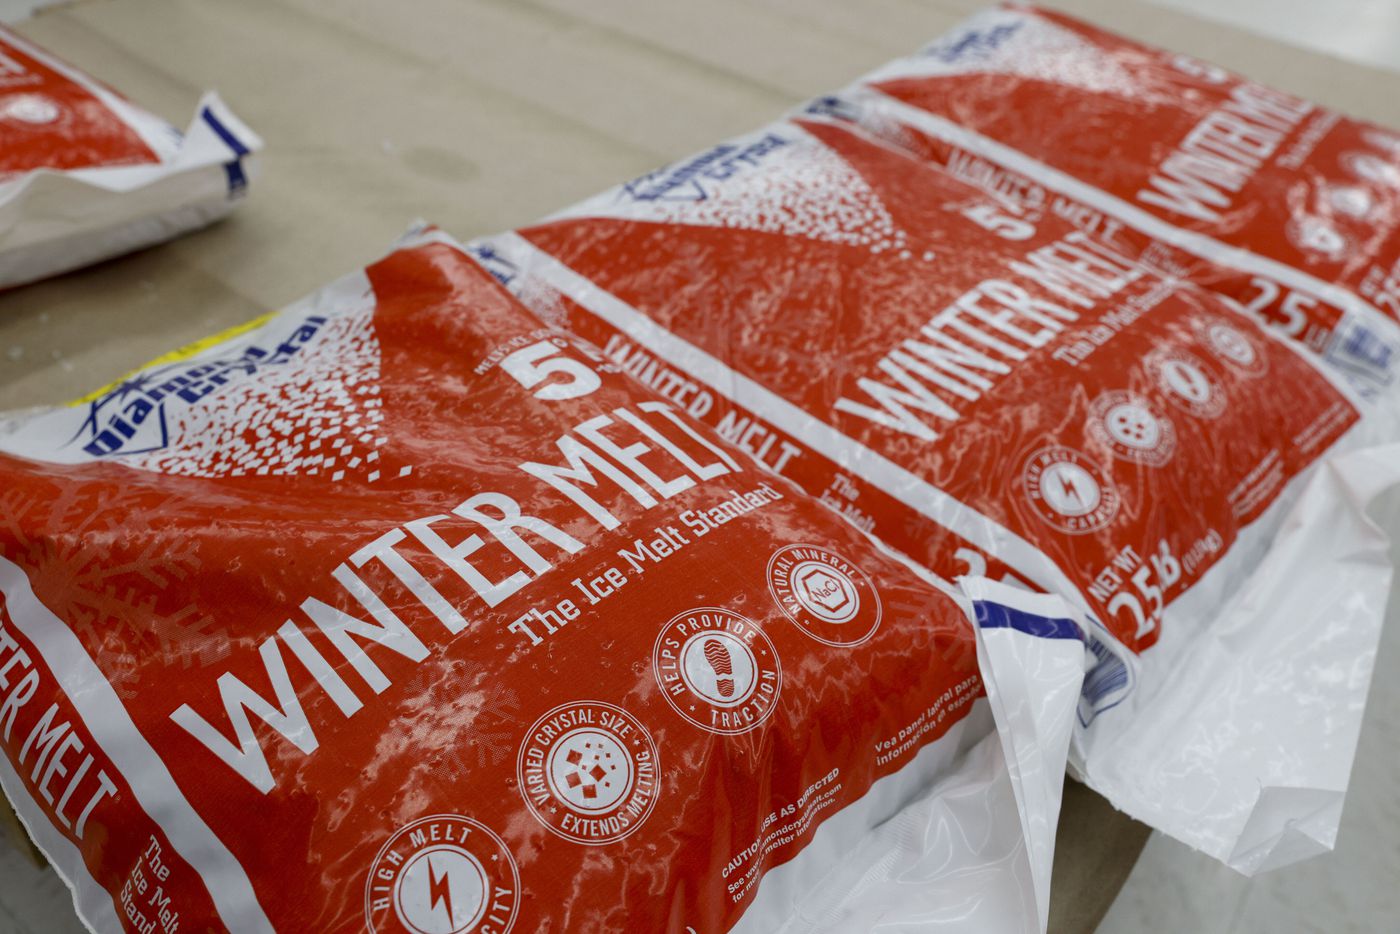 Bags of ice melt sit on a pallet at Elliott’s Hardware in Dallas, Monday, Jan. 30, 2023....